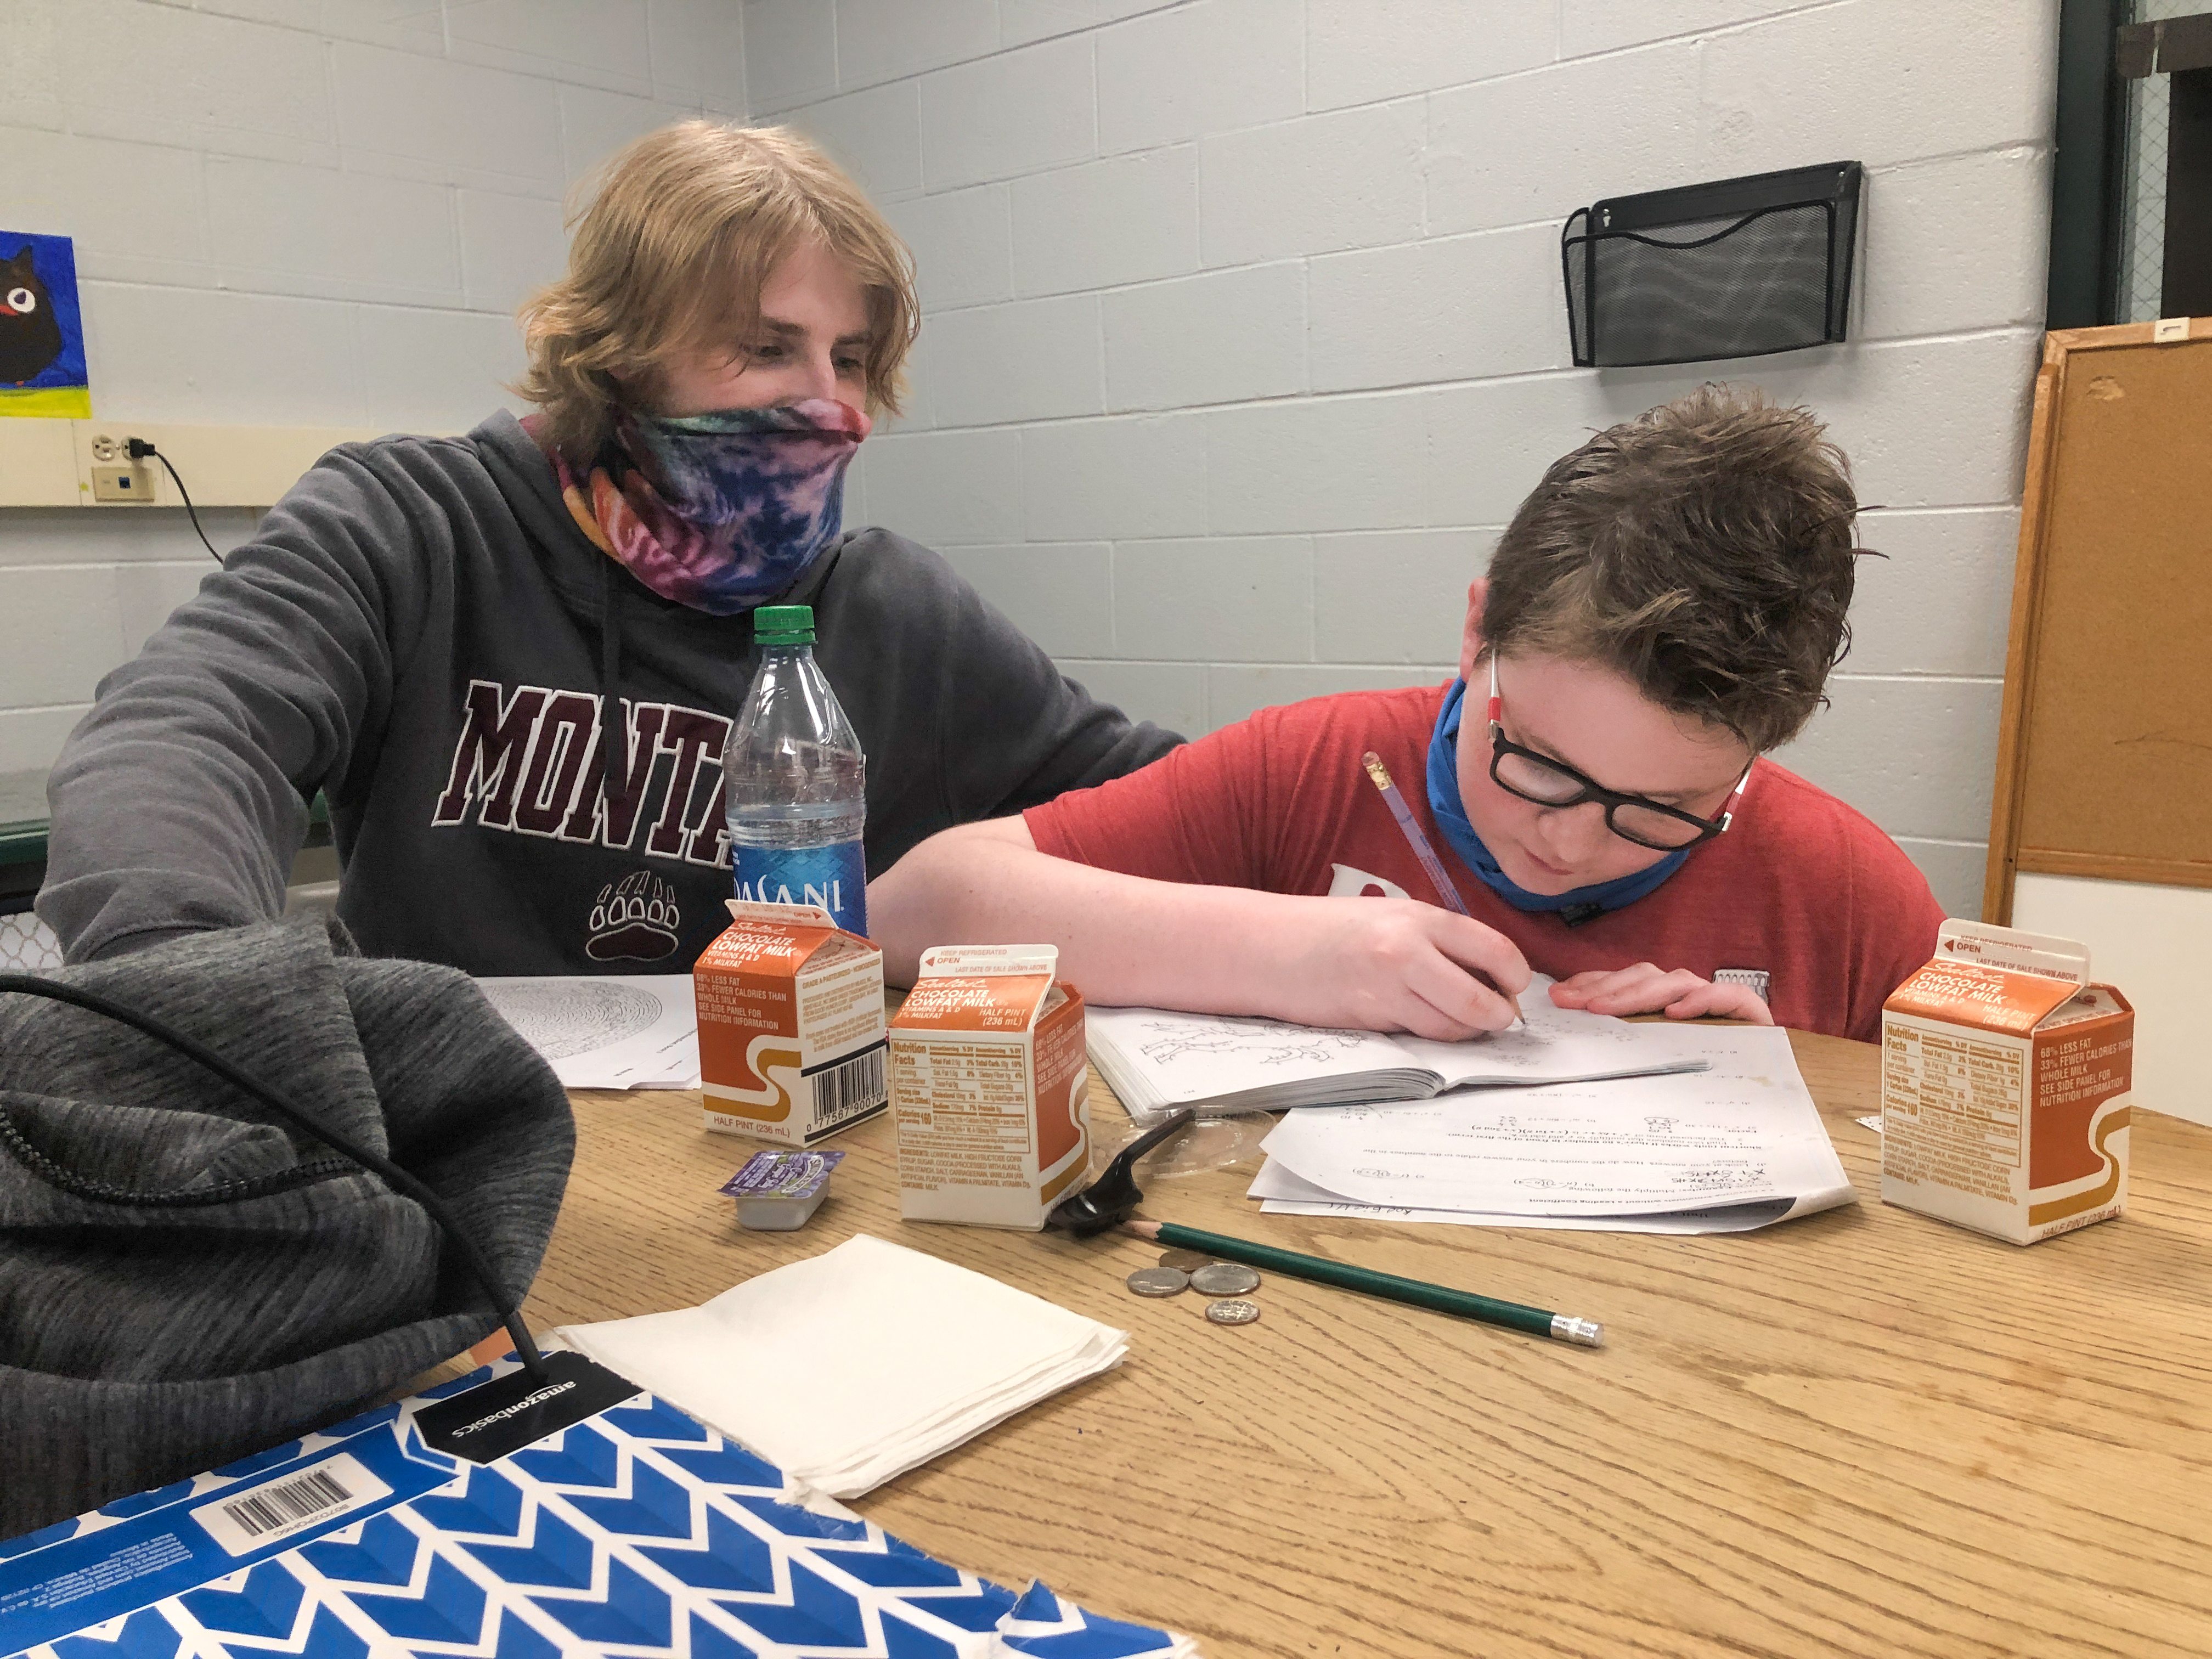 A teacher wearing a mask leans over the shoulder of a student who is writing in a notebook